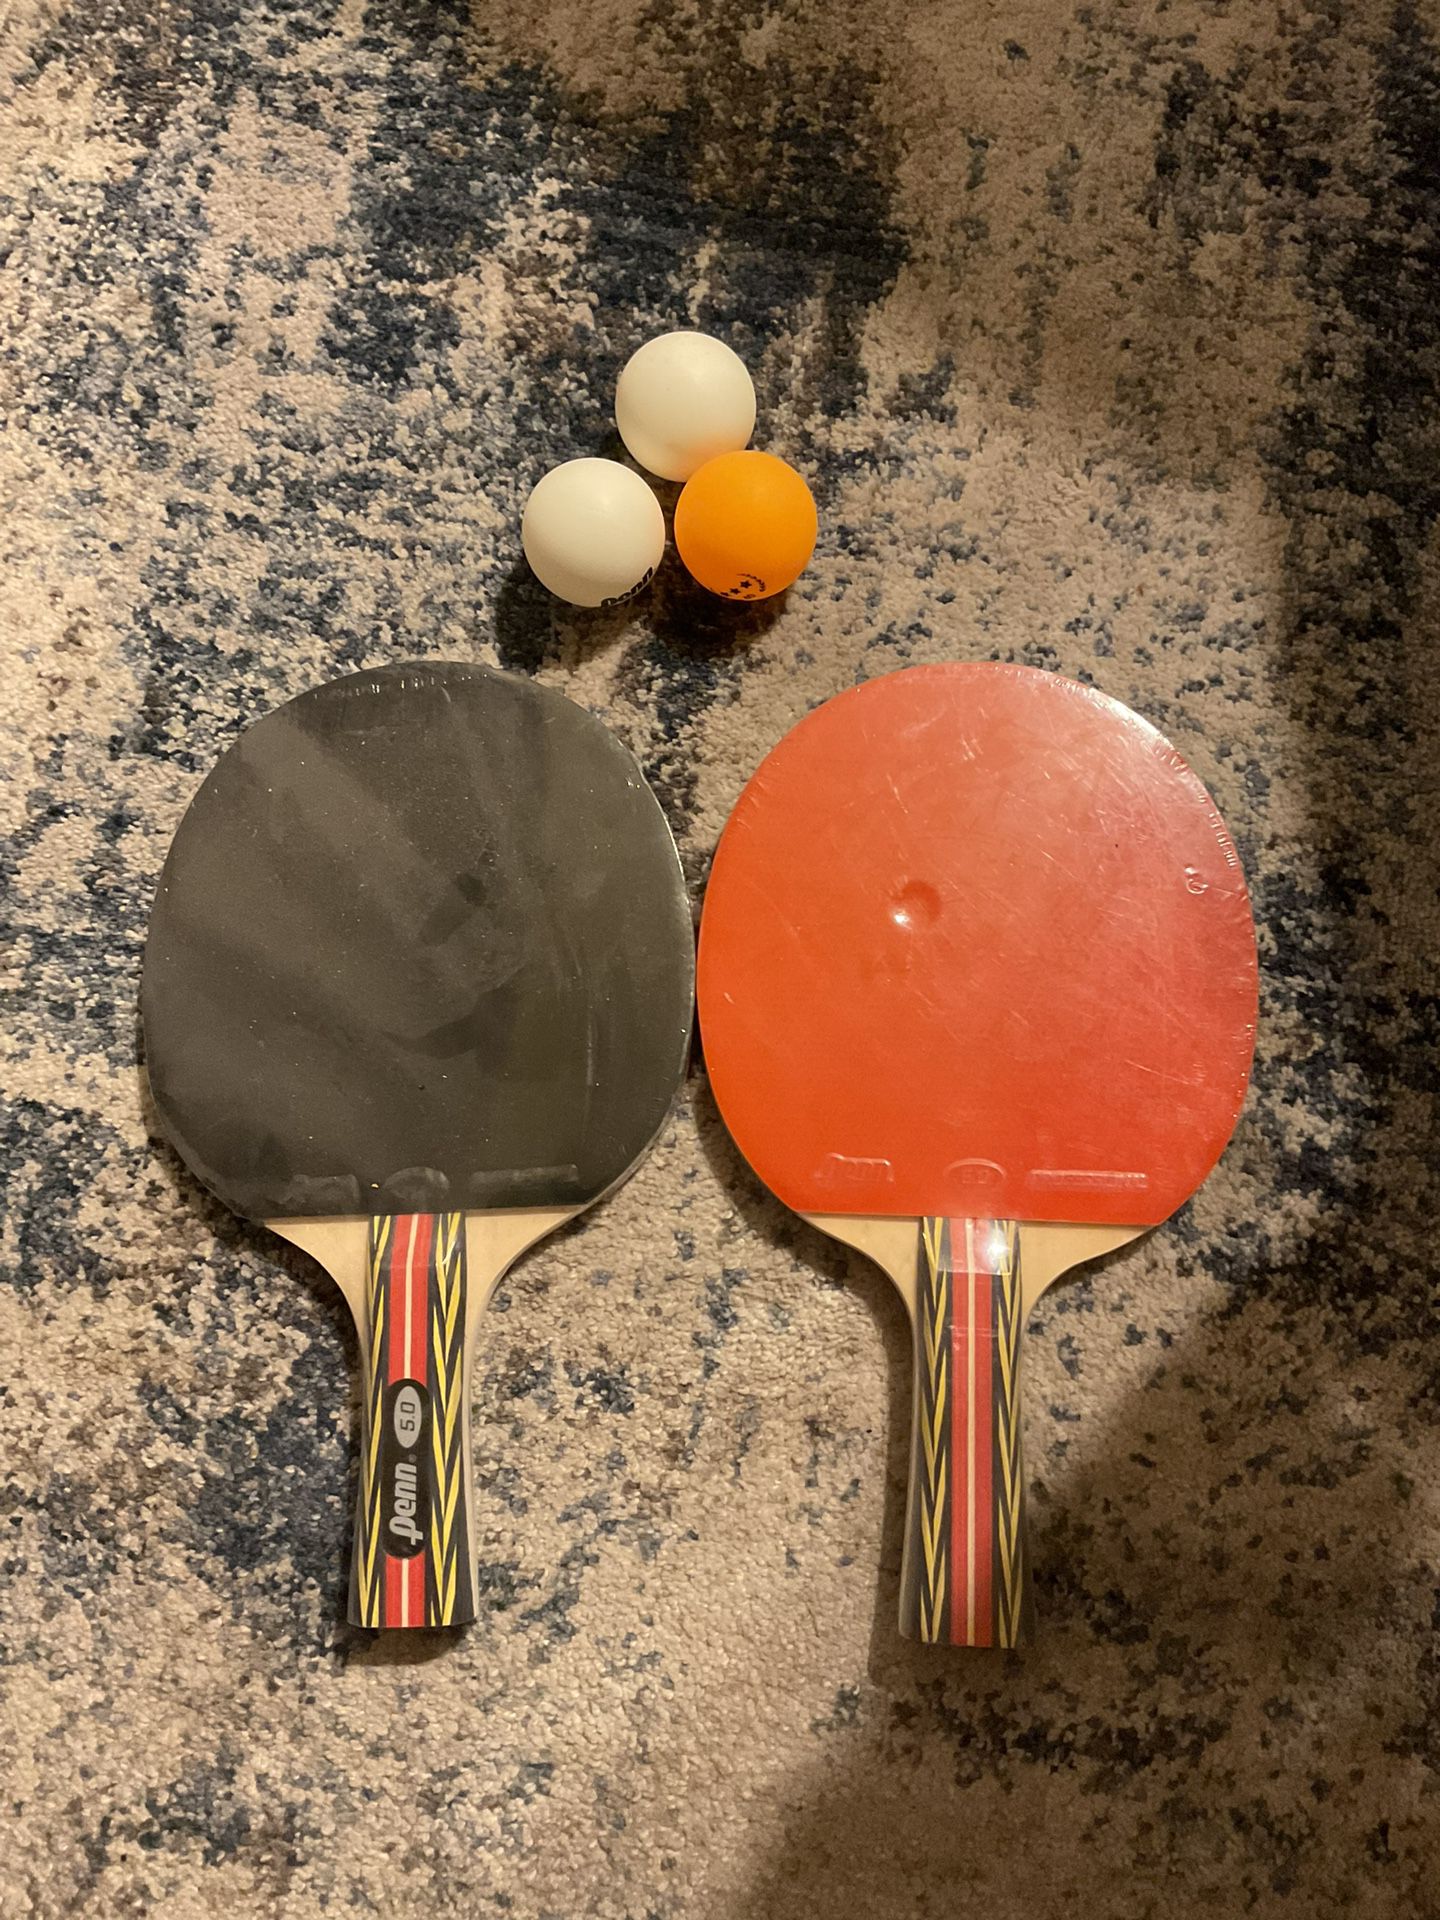 Penn 5.0 Table Tennis Ping Pong Paddles With Balls